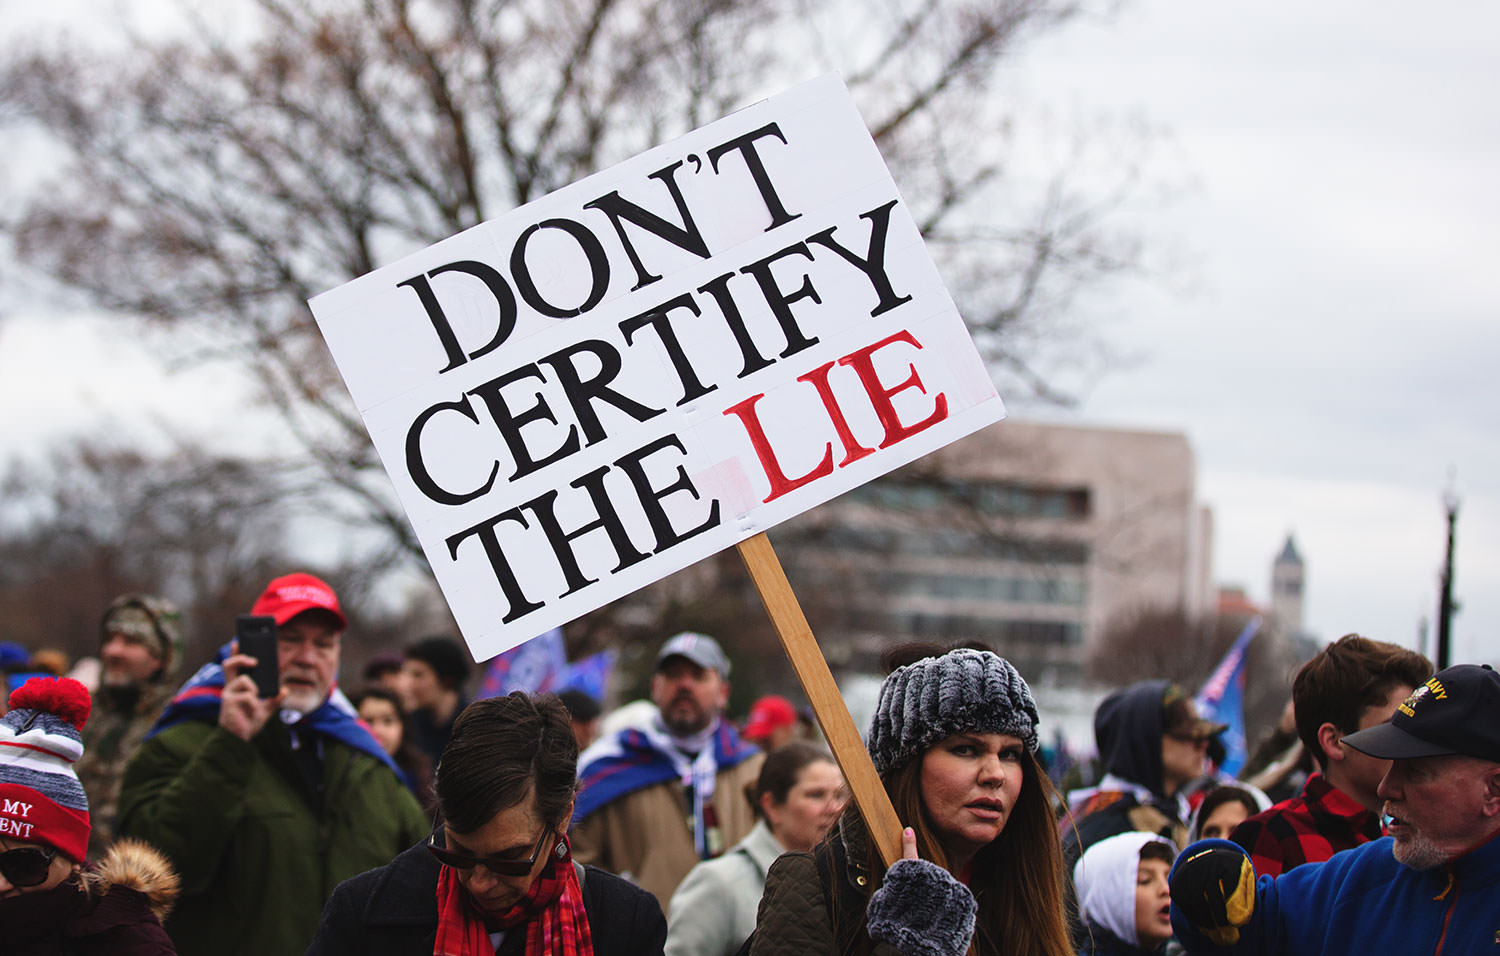 Woman holding a sign that reads "Don't certfiy the Lie"